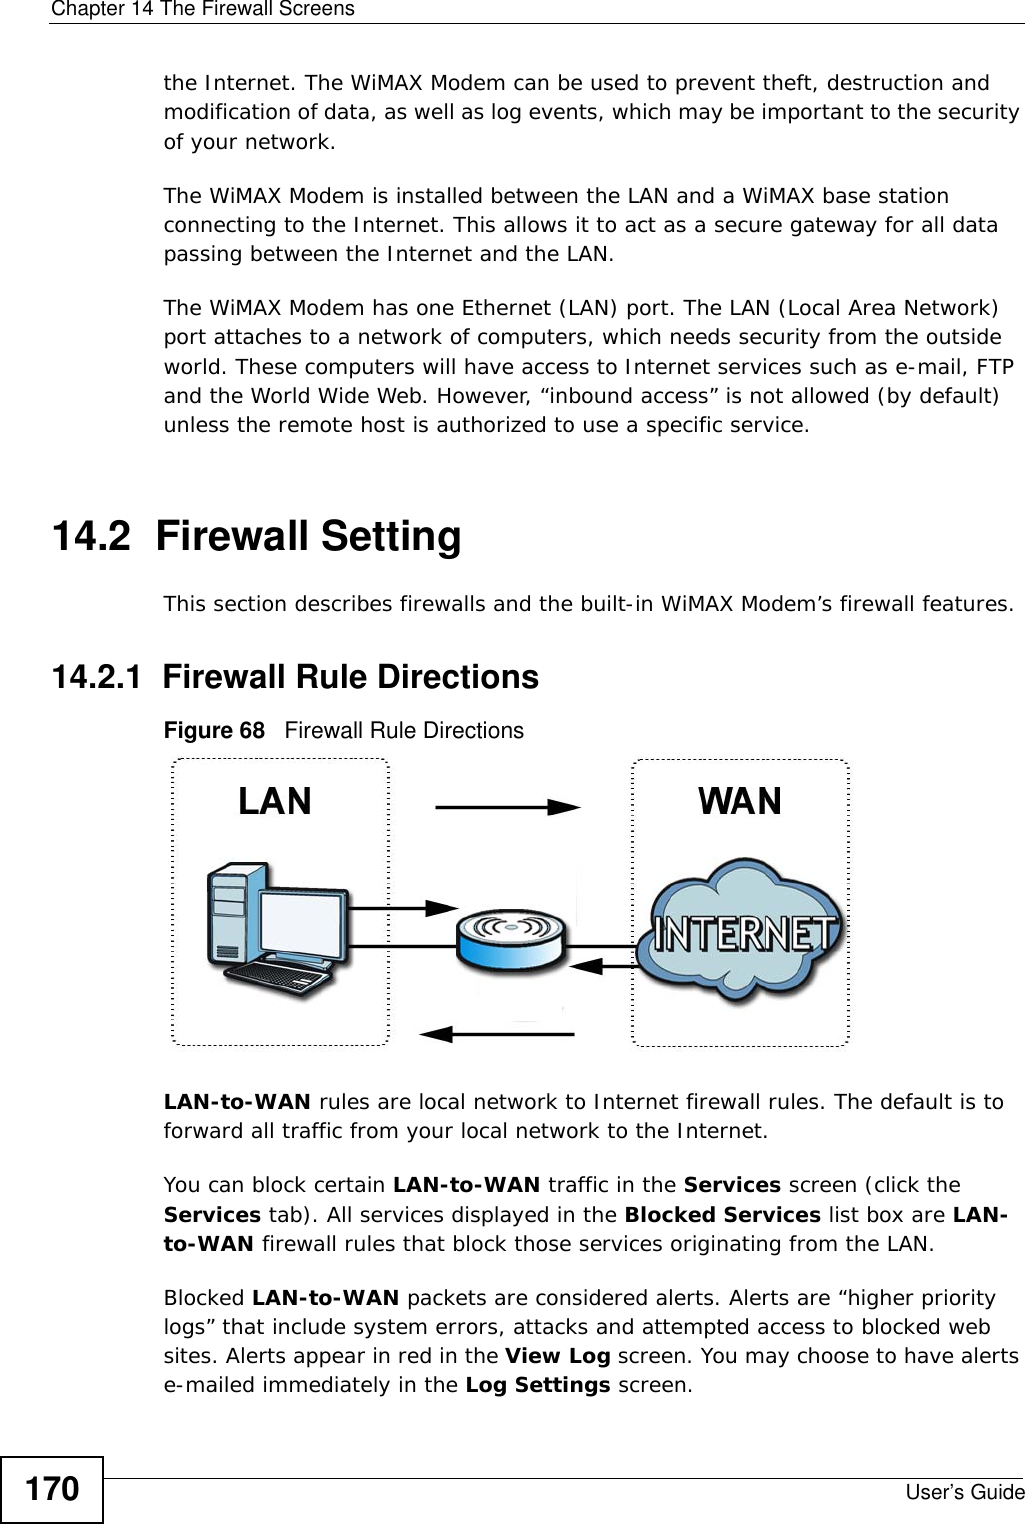 Chapter 14 The Firewall ScreensUser’s Guide170the Internet. The WiMAX Modem can be used to prevent theft, destruction and modification of data, as well as log events, which may be important to the security of your network. The WiMAX Modem is installed between the LAN and a WiMAX base station connecting to the Internet. This allows it to act as a secure gateway for all data passing between the Internet and the LAN.The WiMAX Modem has one Ethernet (LAN) port. The LAN (Local Area Network) port attaches to a network of computers, which needs security from the outside world. These computers will have access to Internet services such as e-mail, FTP and the World Wide Web. However, “inbound access” is not allowed (by default) unless the remote host is authorized to use a specific service.14.2  Firewall SettingThis section describes firewalls and the built-in WiMAX Modem’s firewall features.14.2.1  Firewall Rule DirectionsFigure 68   Firewall Rule DirectionsLAN-to-WAN rules are local network to Internet firewall rules. The default is to forward all traffic from your local network to the Internet. You can block certain LAN-to-WAN traffic in the Services screen (click the Services tab). All services displayed in the Blocked Services list box are LAN-to-WAN firewall rules that block those services originating from the LAN. Blocked LAN-to-WAN packets are considered alerts. Alerts are “higher priority logs” that include system errors, attacks and attempted access to blocked web sites. Alerts appear in red in the View Log screen. You may choose to have alerts e-mailed immediately in the Log Settings screen.